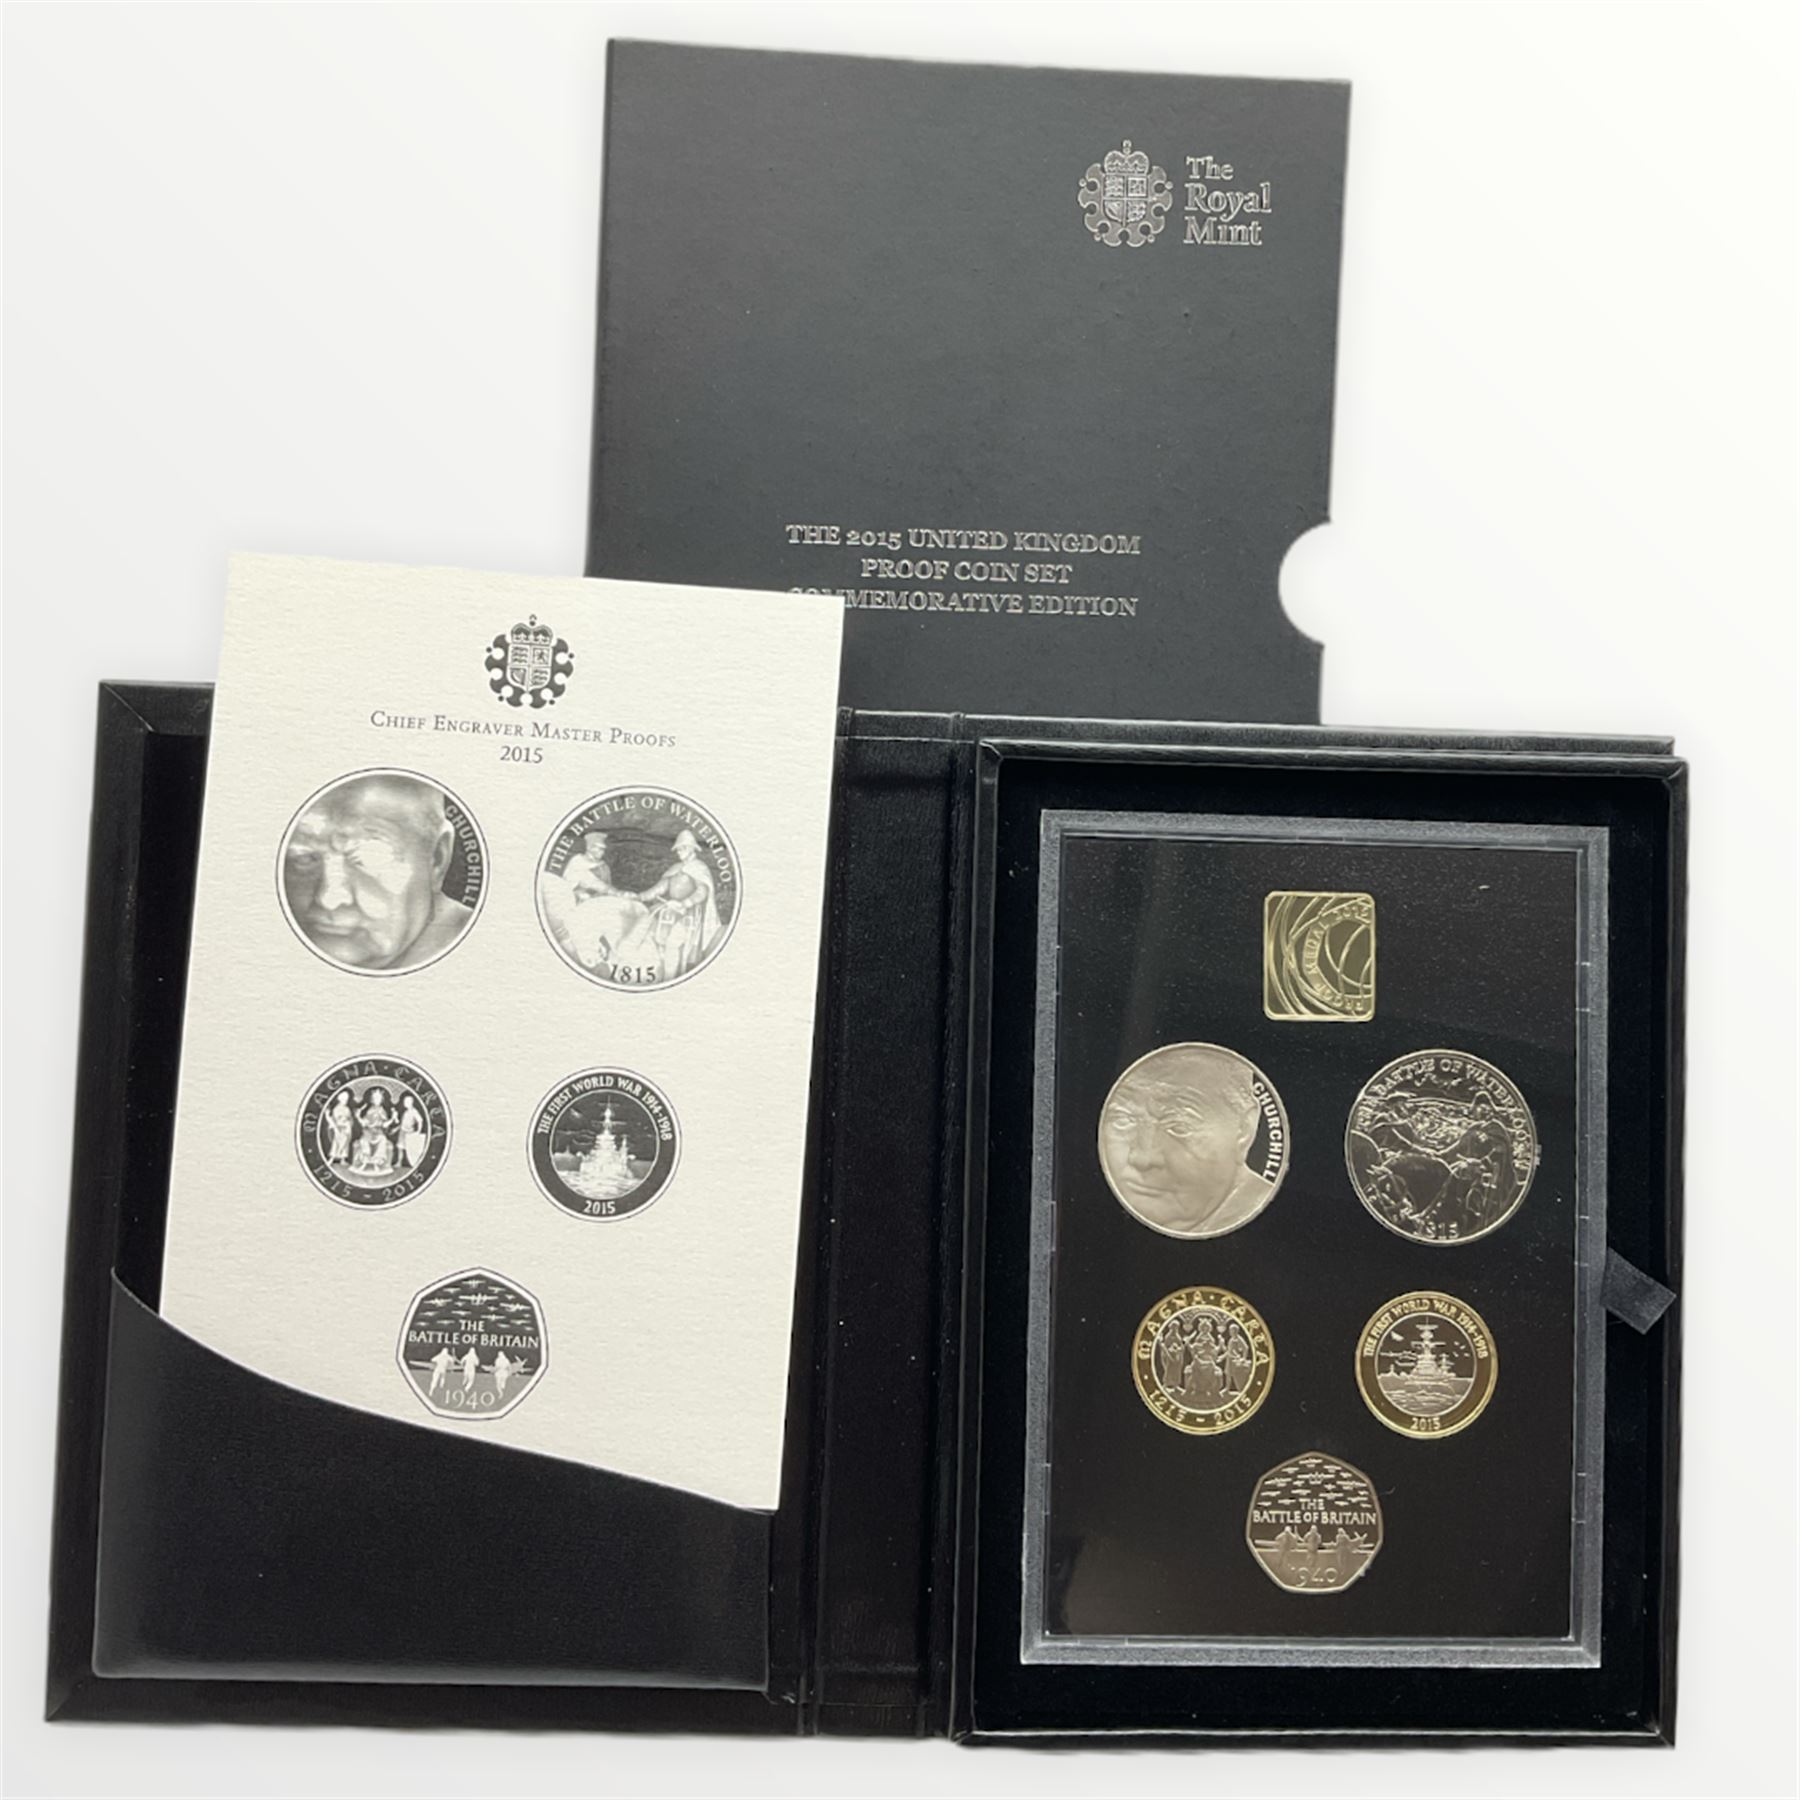 The Royal Mint United Kingdom 2015 five coin proof set 'Commemorative Edition'